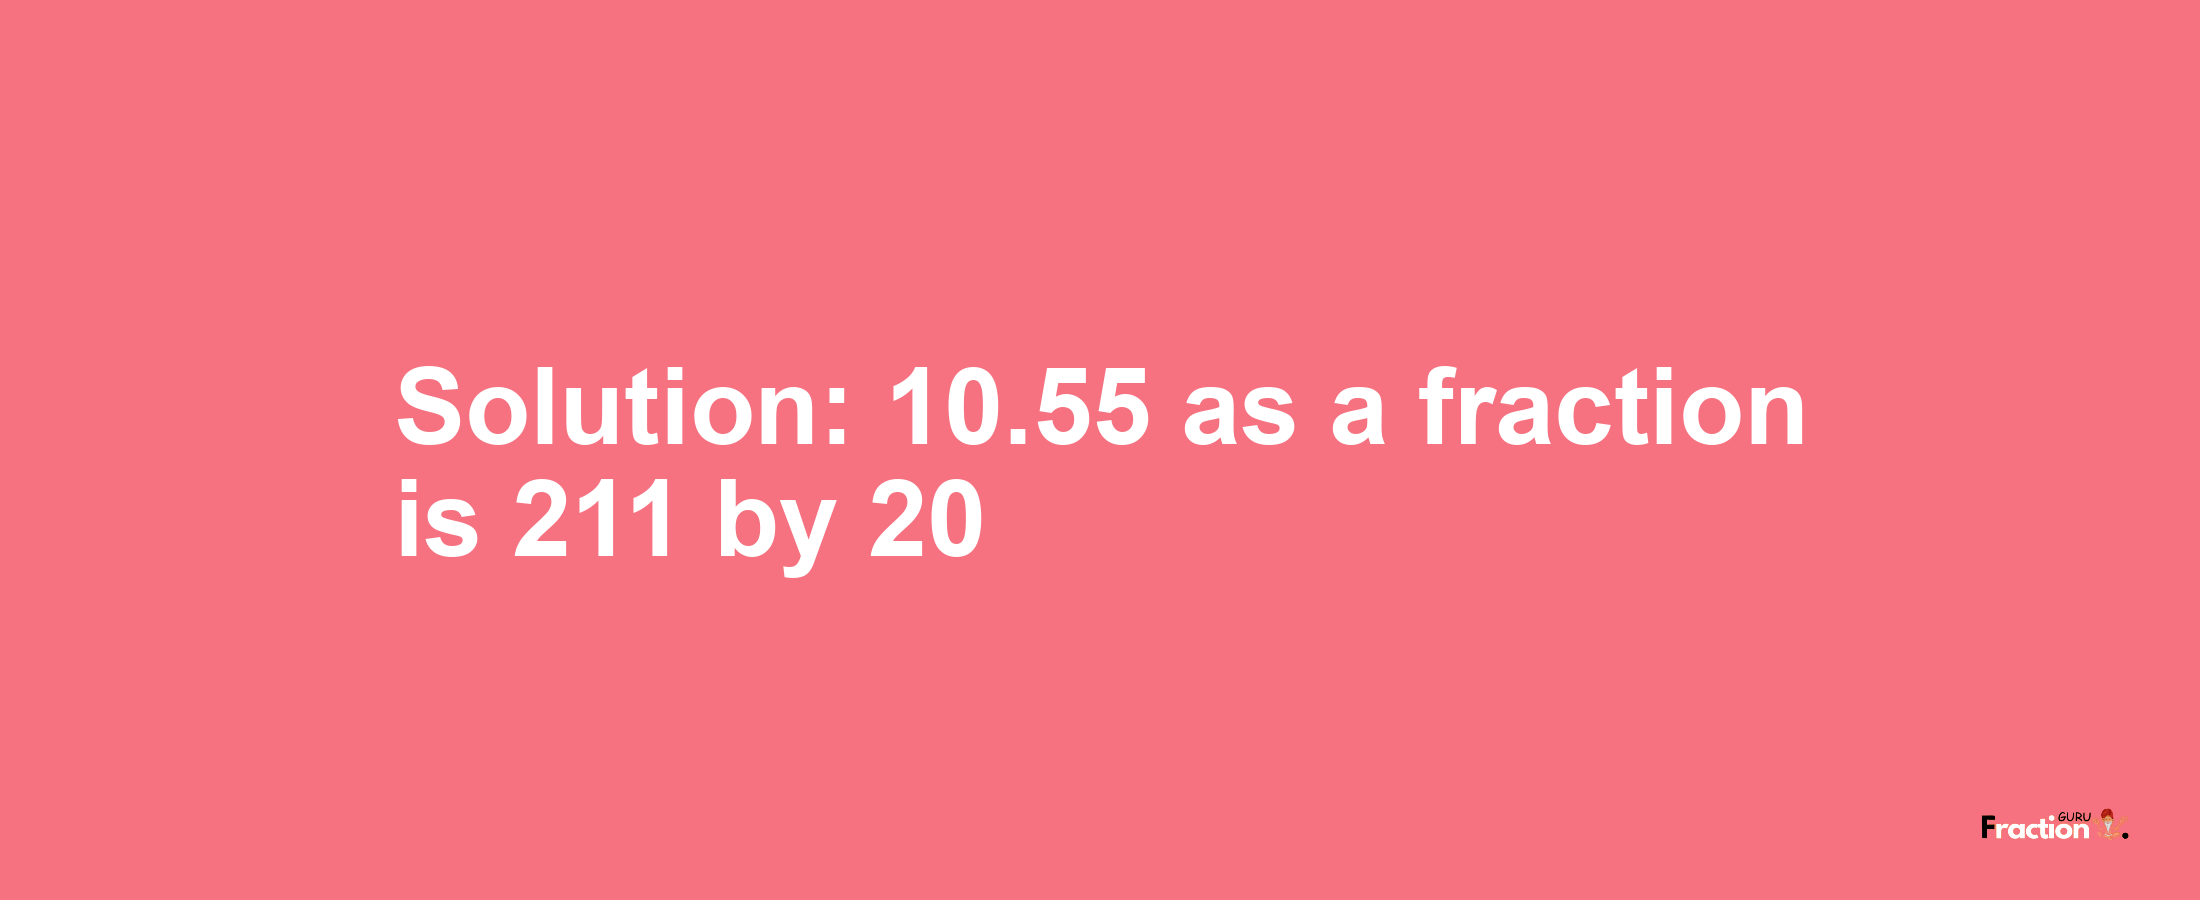 Solution:10.55 as a fraction is 211/20